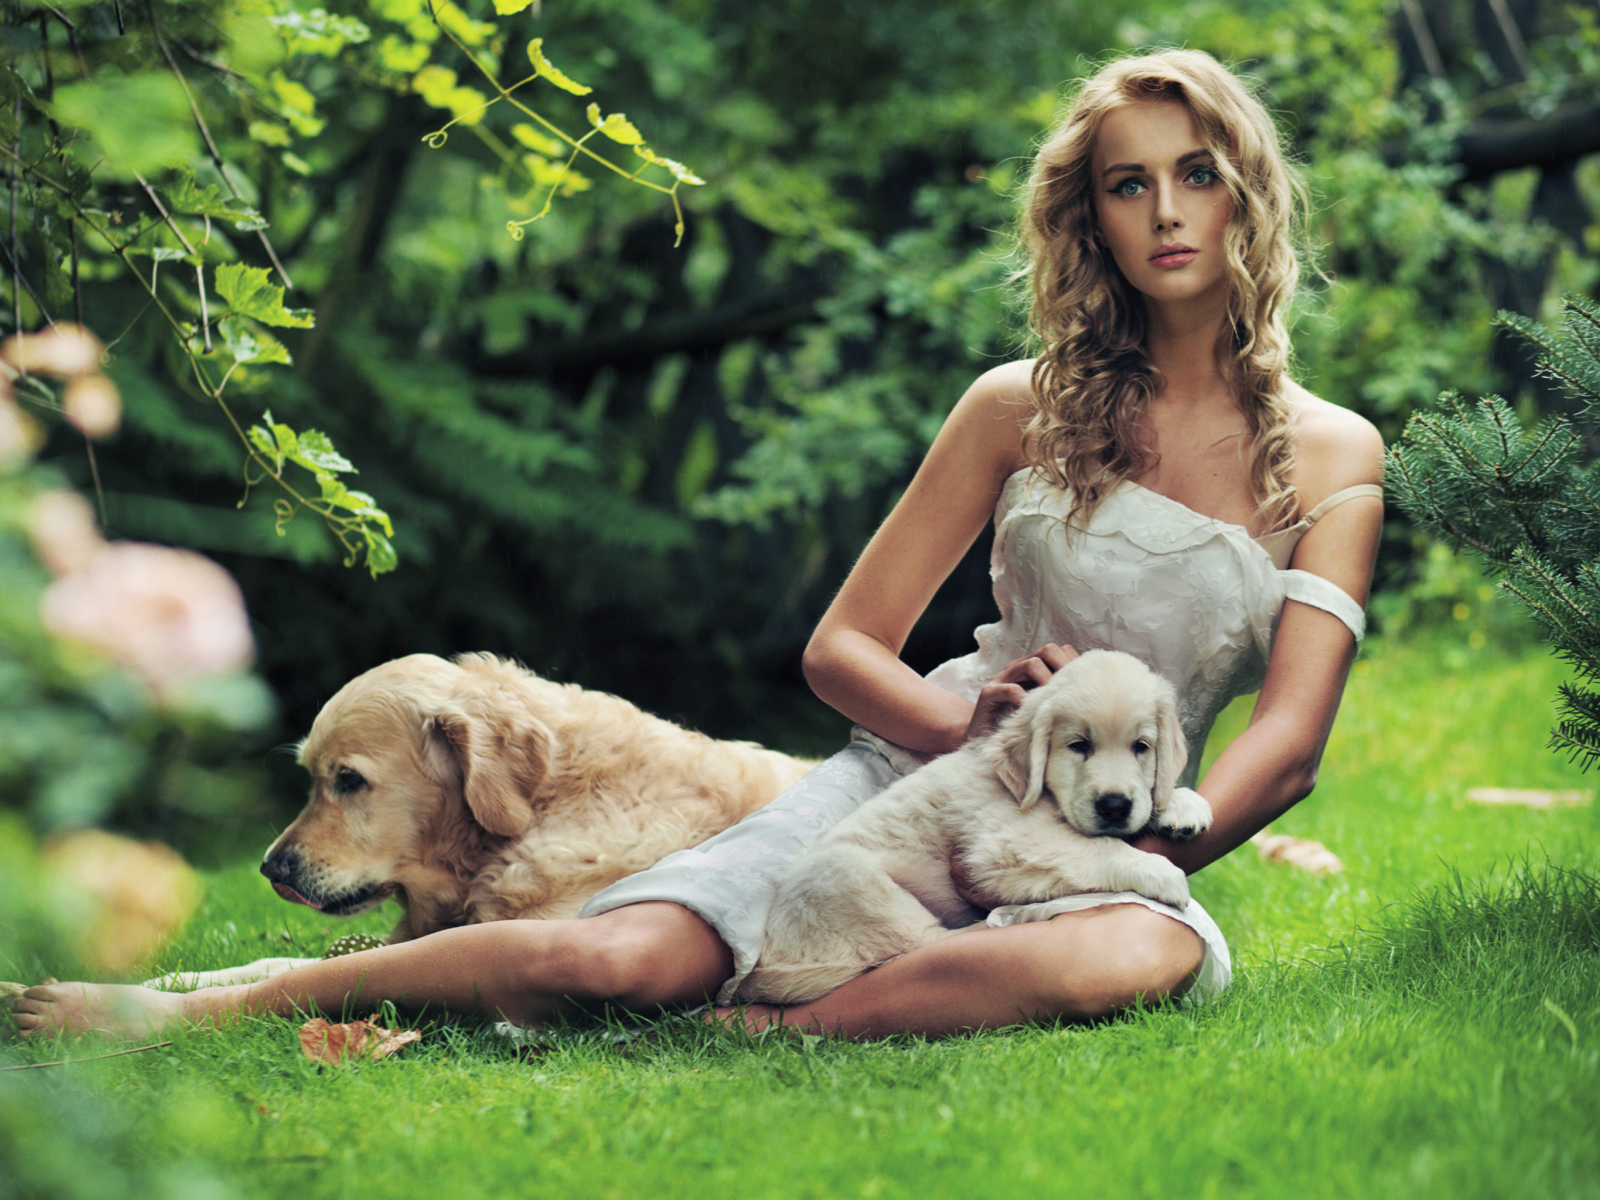 Model And Dogs screenshot #1 1600x1200